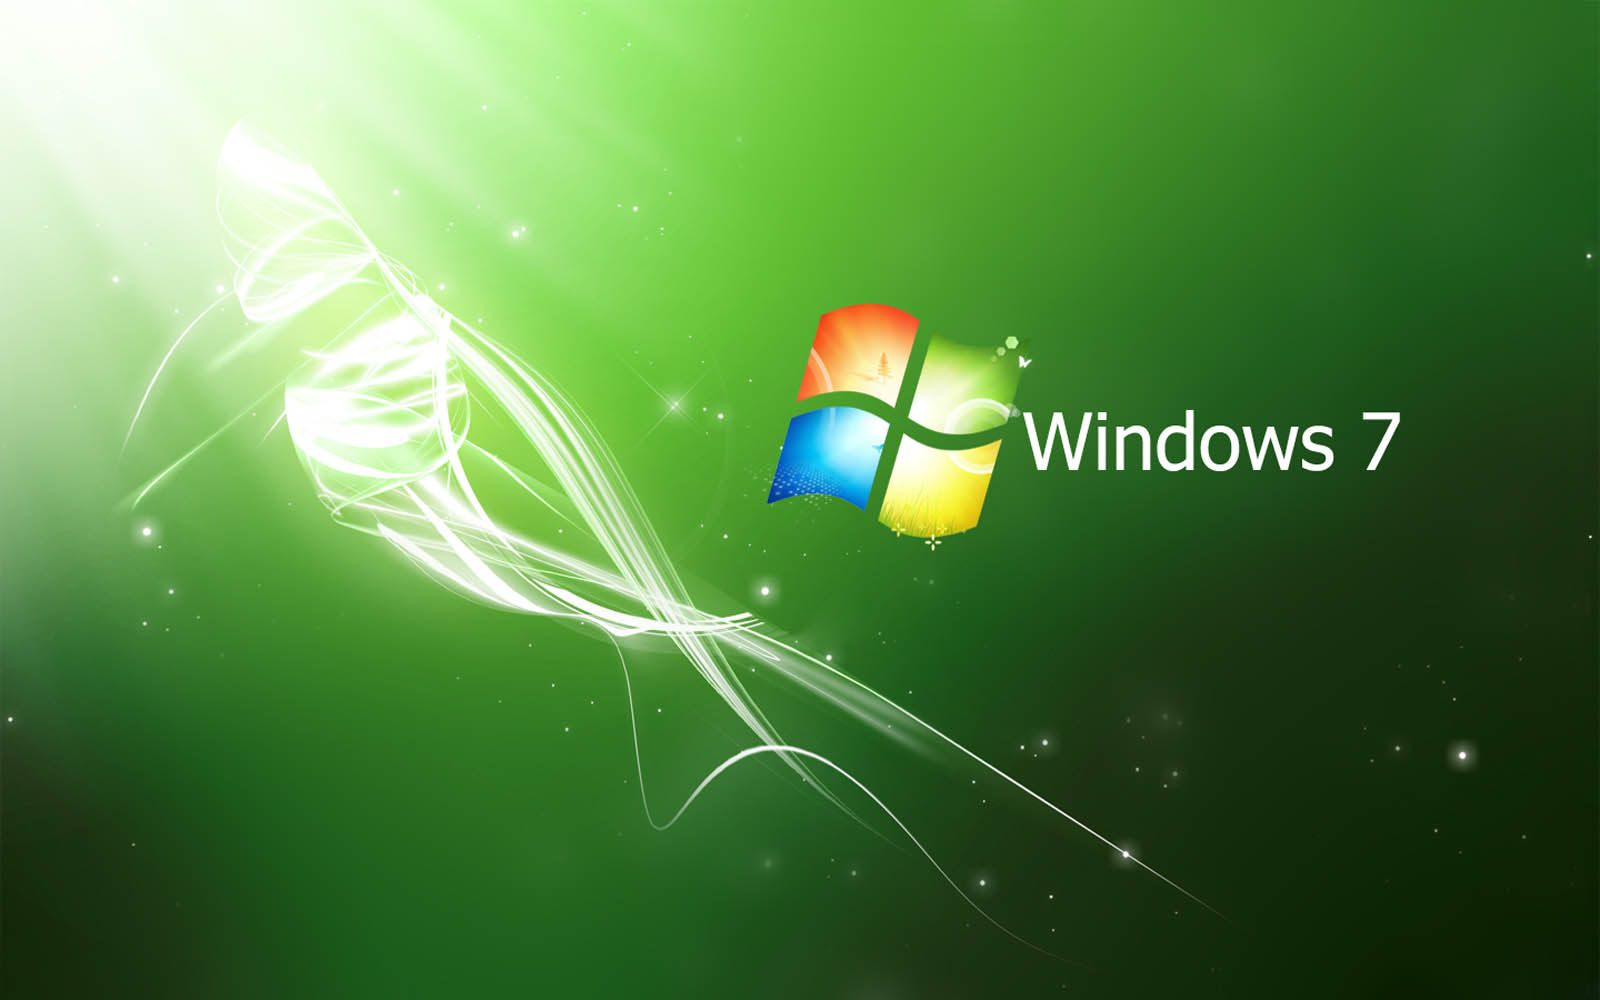 Tag Green Windows 7 Wallpapers BackgroundsPhotos Images and